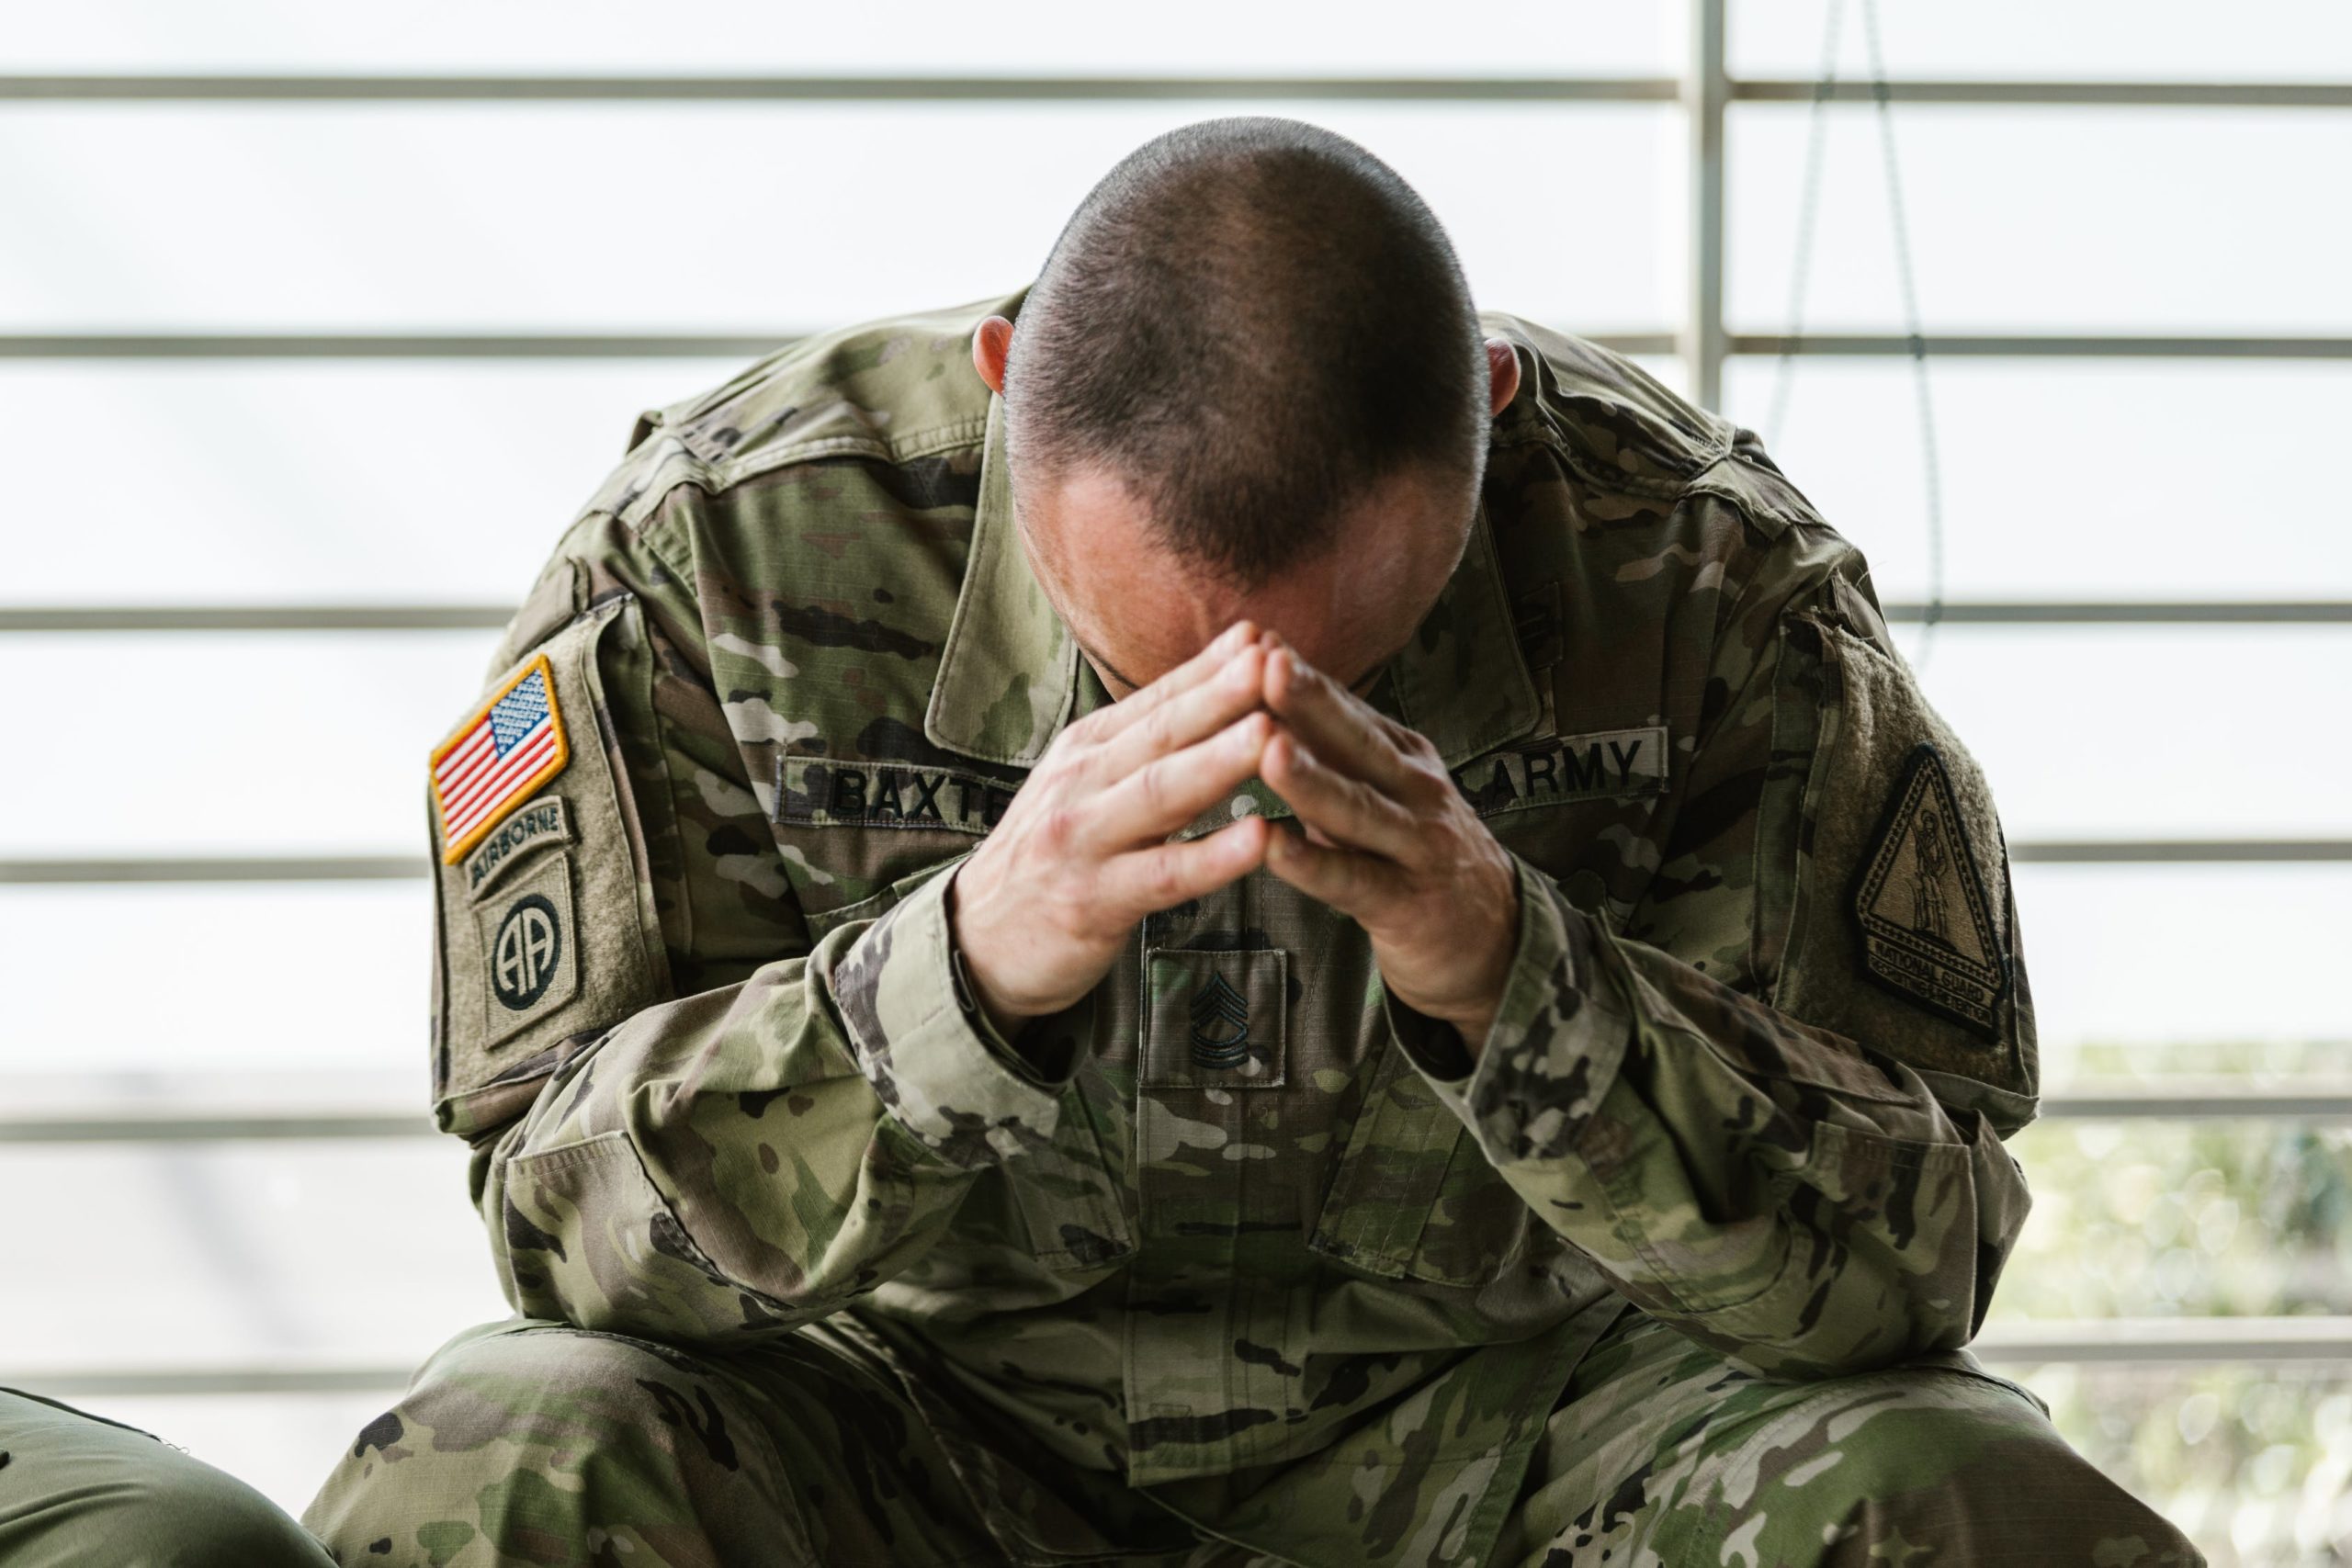 8 Struggles of PTSD Veterans That May Surprise You